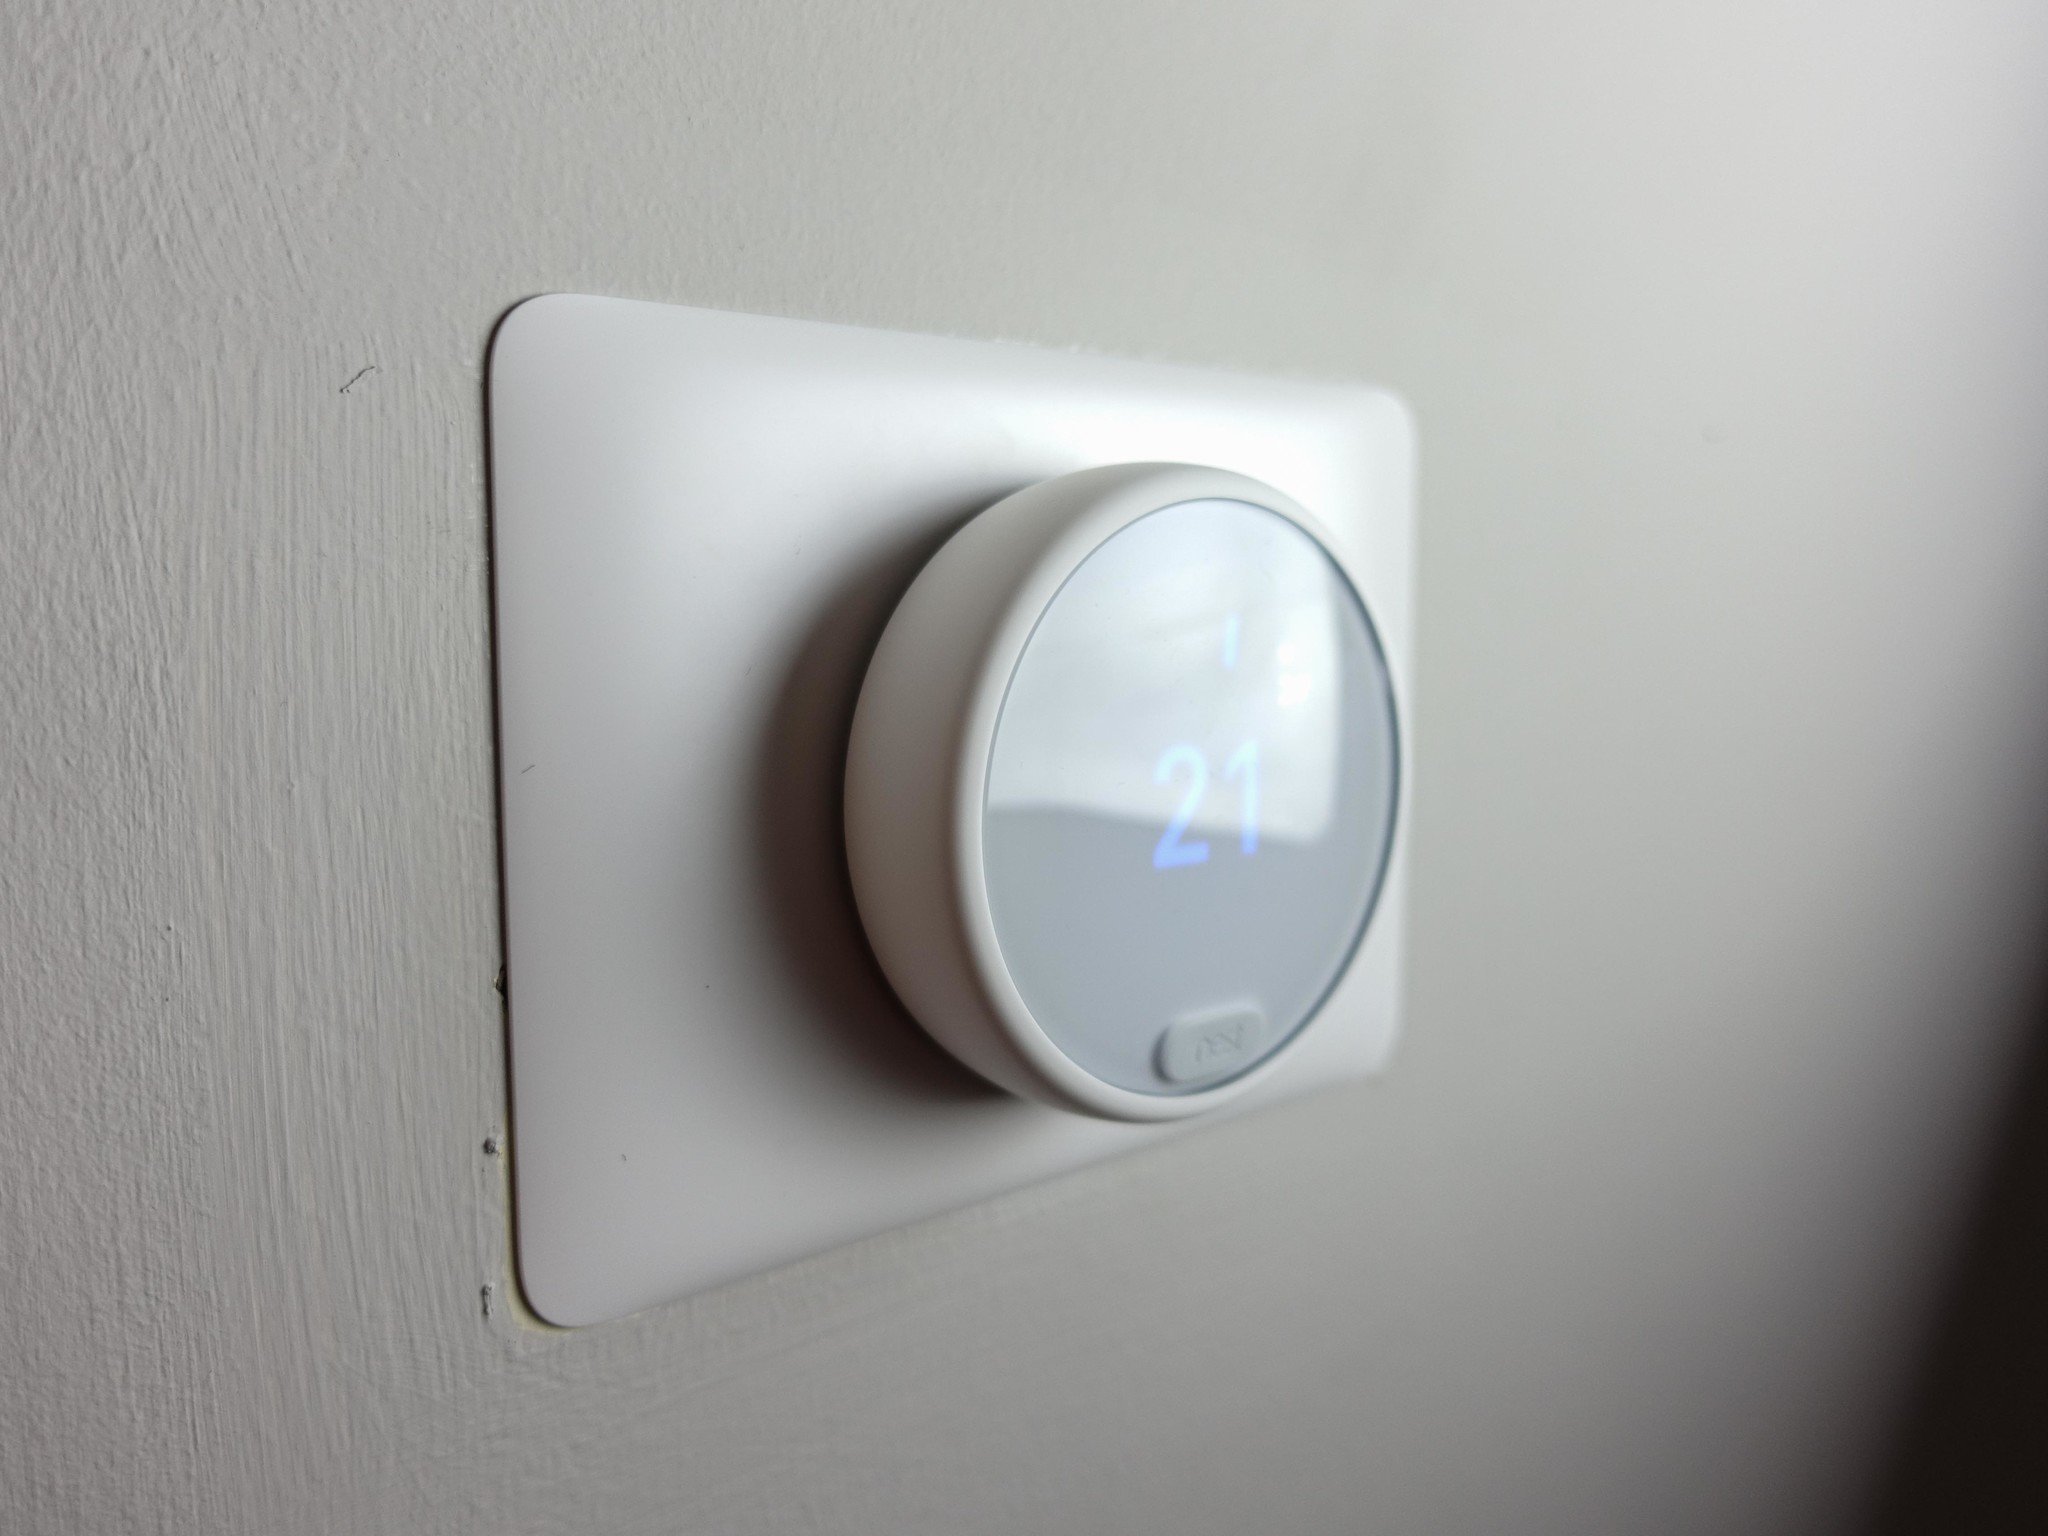 Google S Upcoming Nest Thermostat Will Reportedly Have Pixel 4 Like Gesture Controls Android Central - Wall Plate Cover For Nest Thermostat E